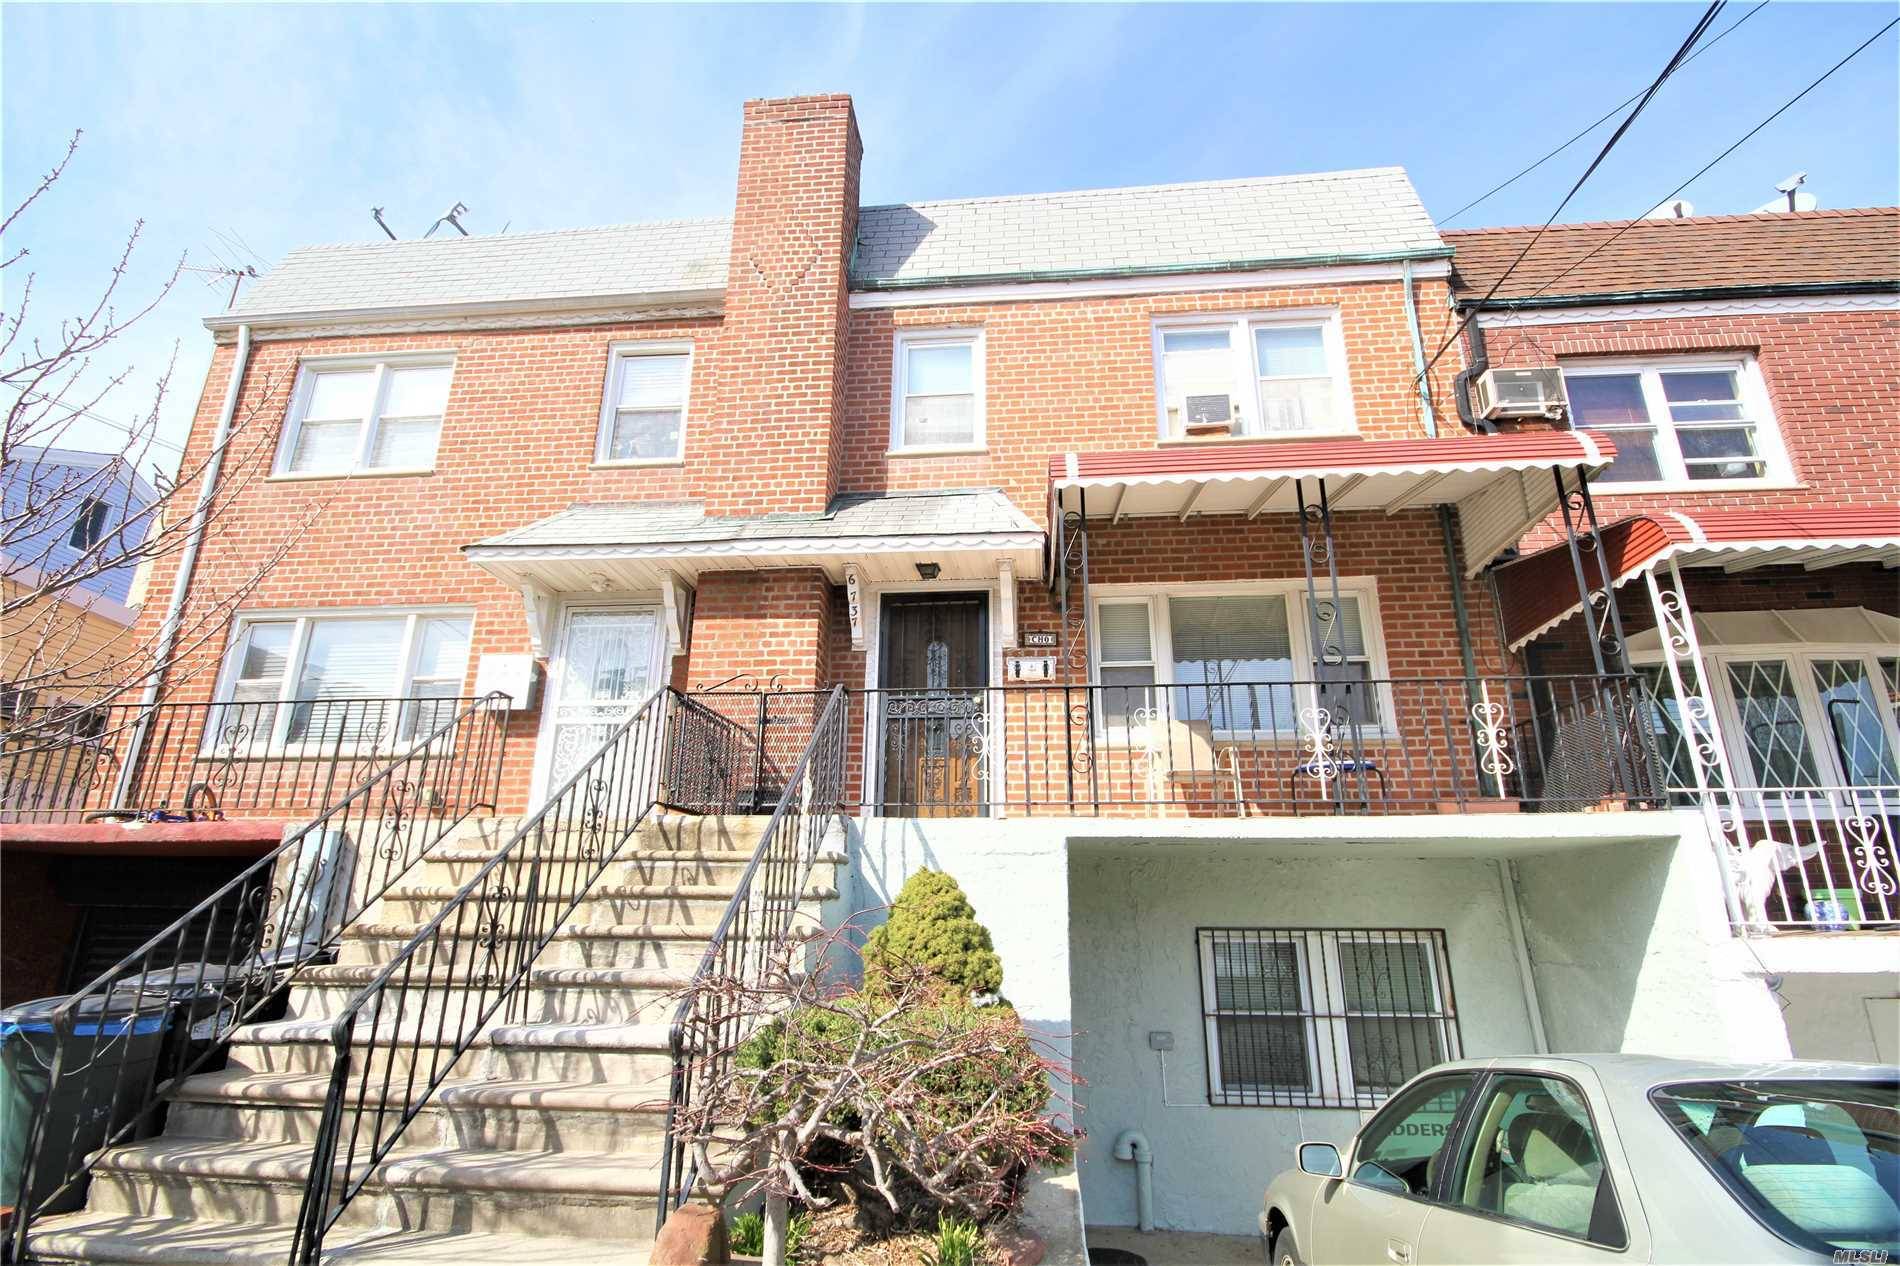 Maspeth, attached single family brick side hall colonial with a spacious 20' by 37' building size.